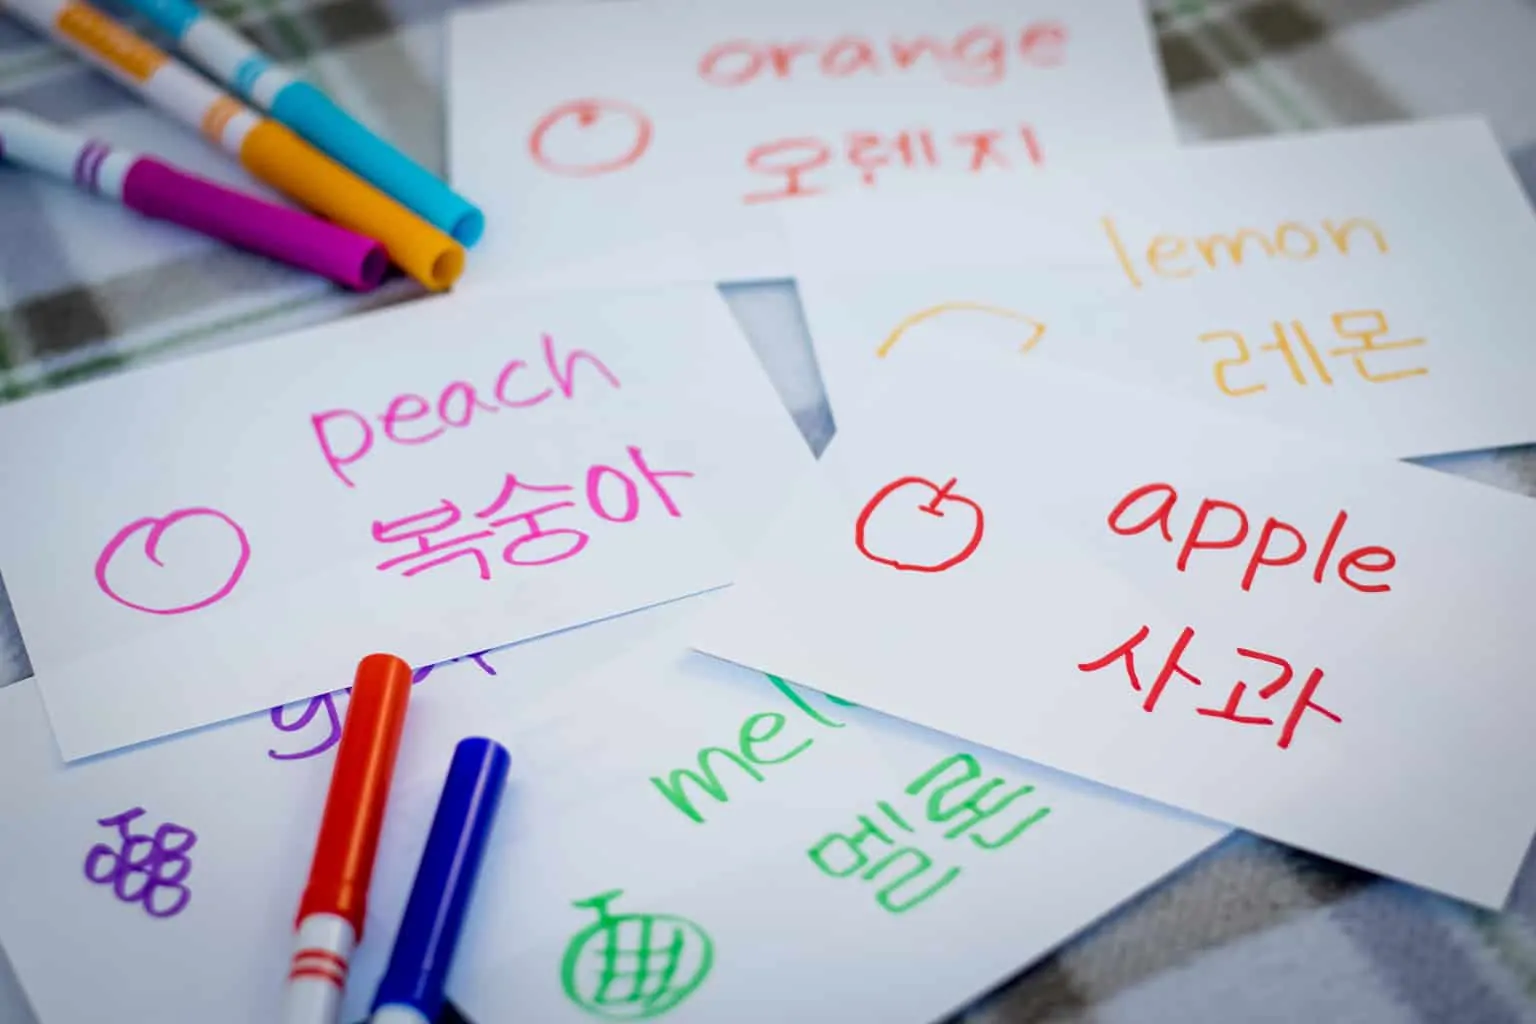 Korean fruits written on index cards in different colors to help learn Korean